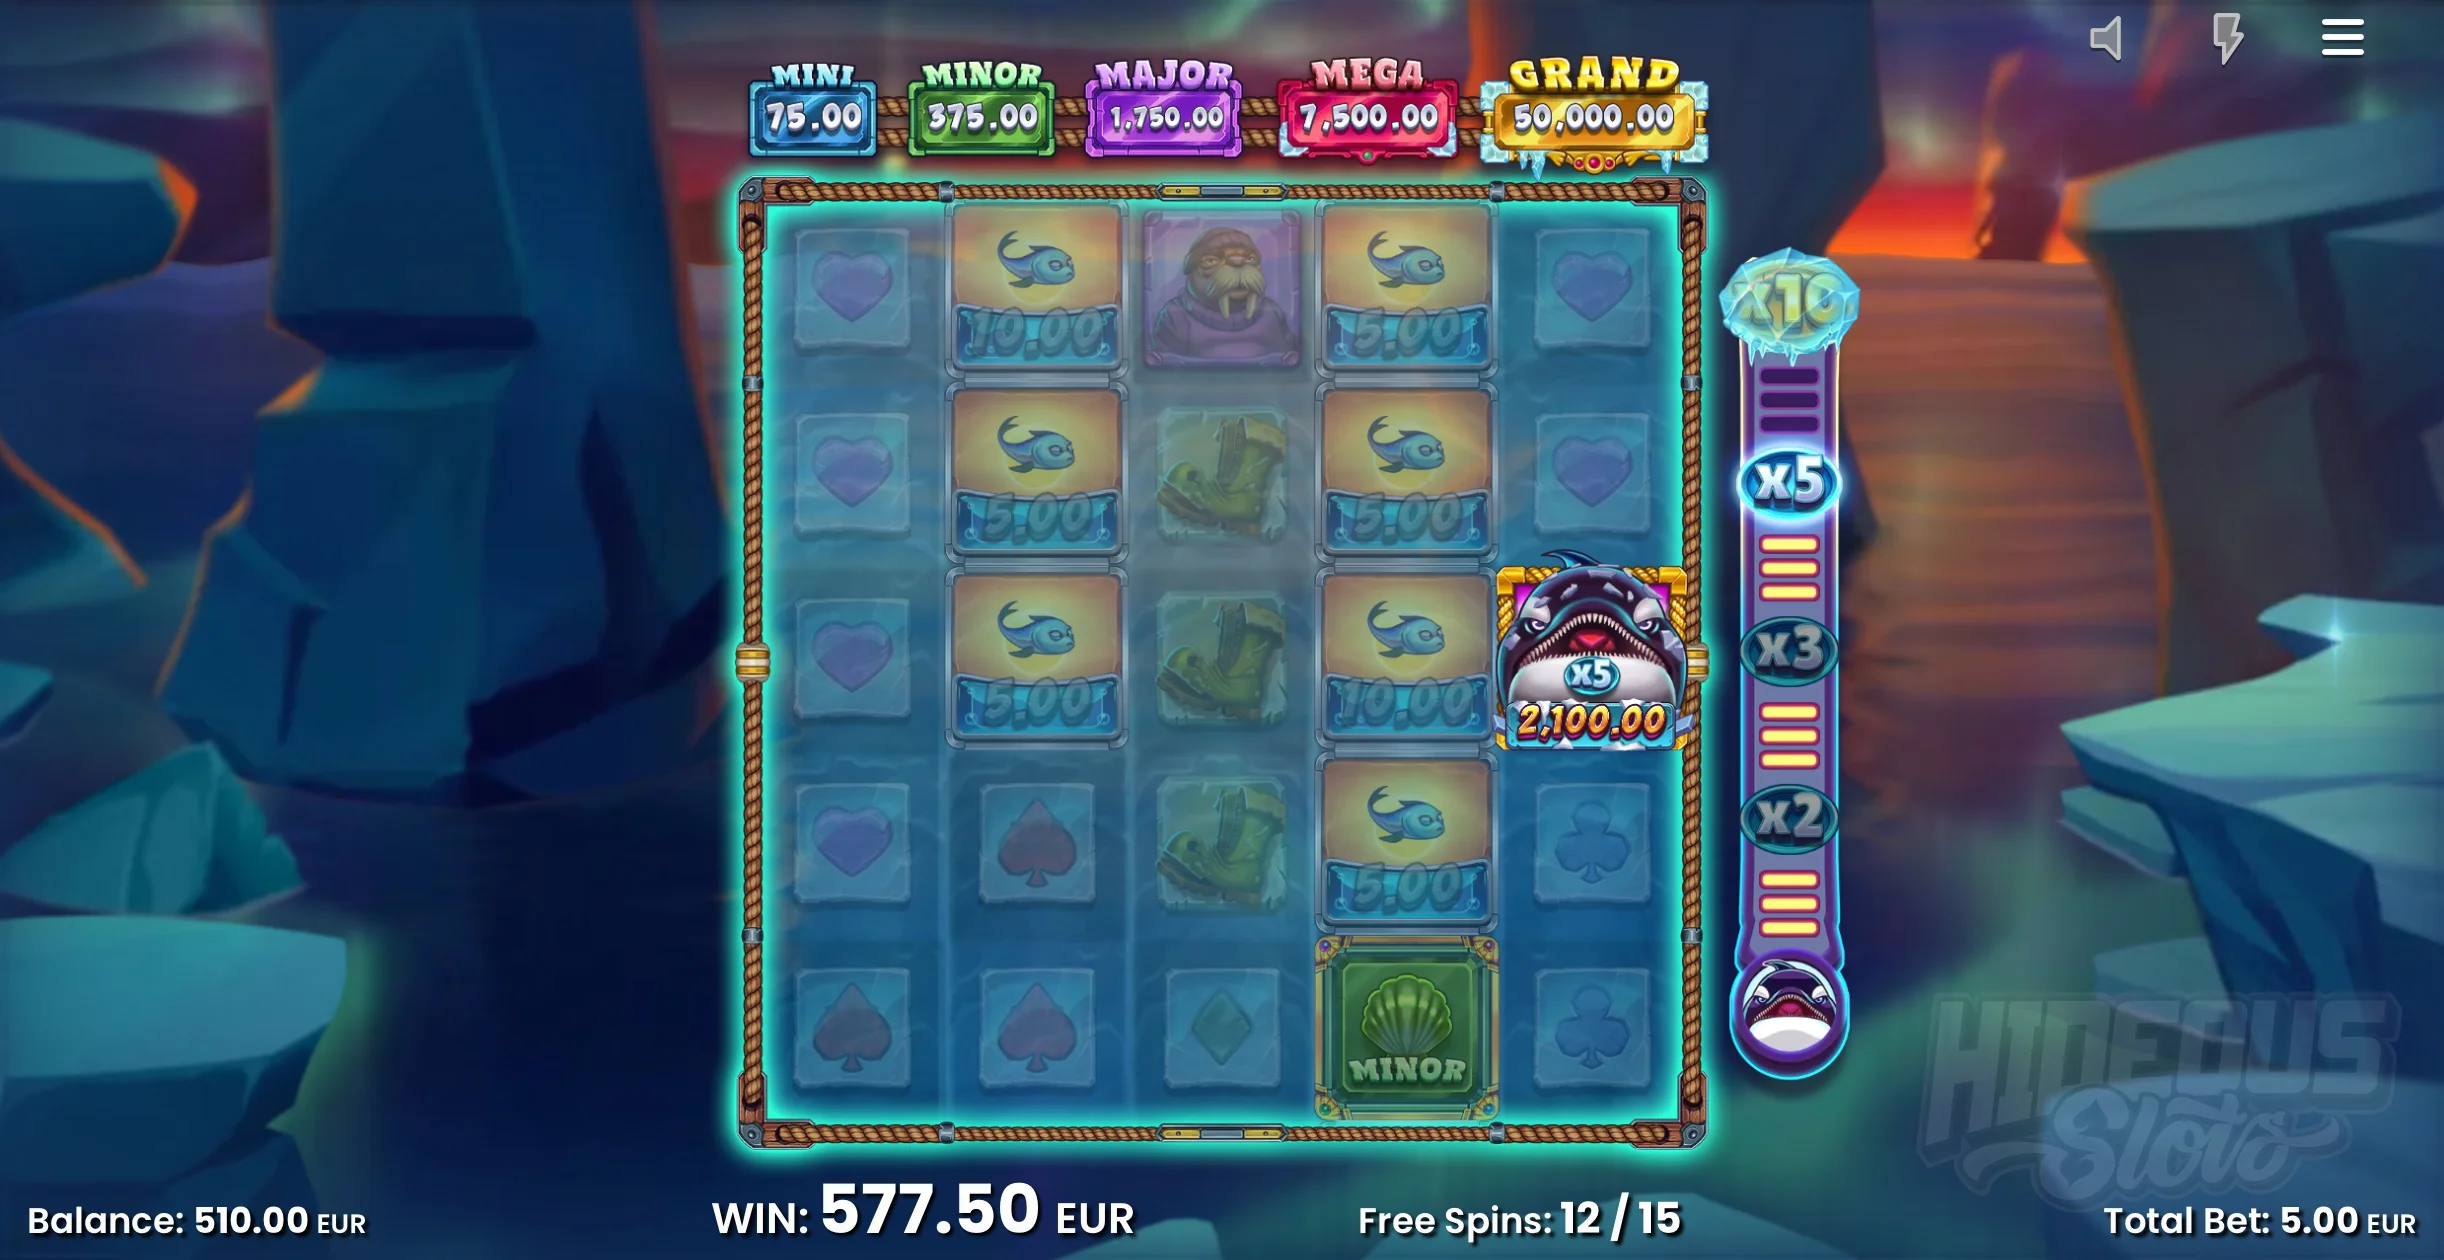 All Orcas Are Collected and Added to the Meter During Free Spins